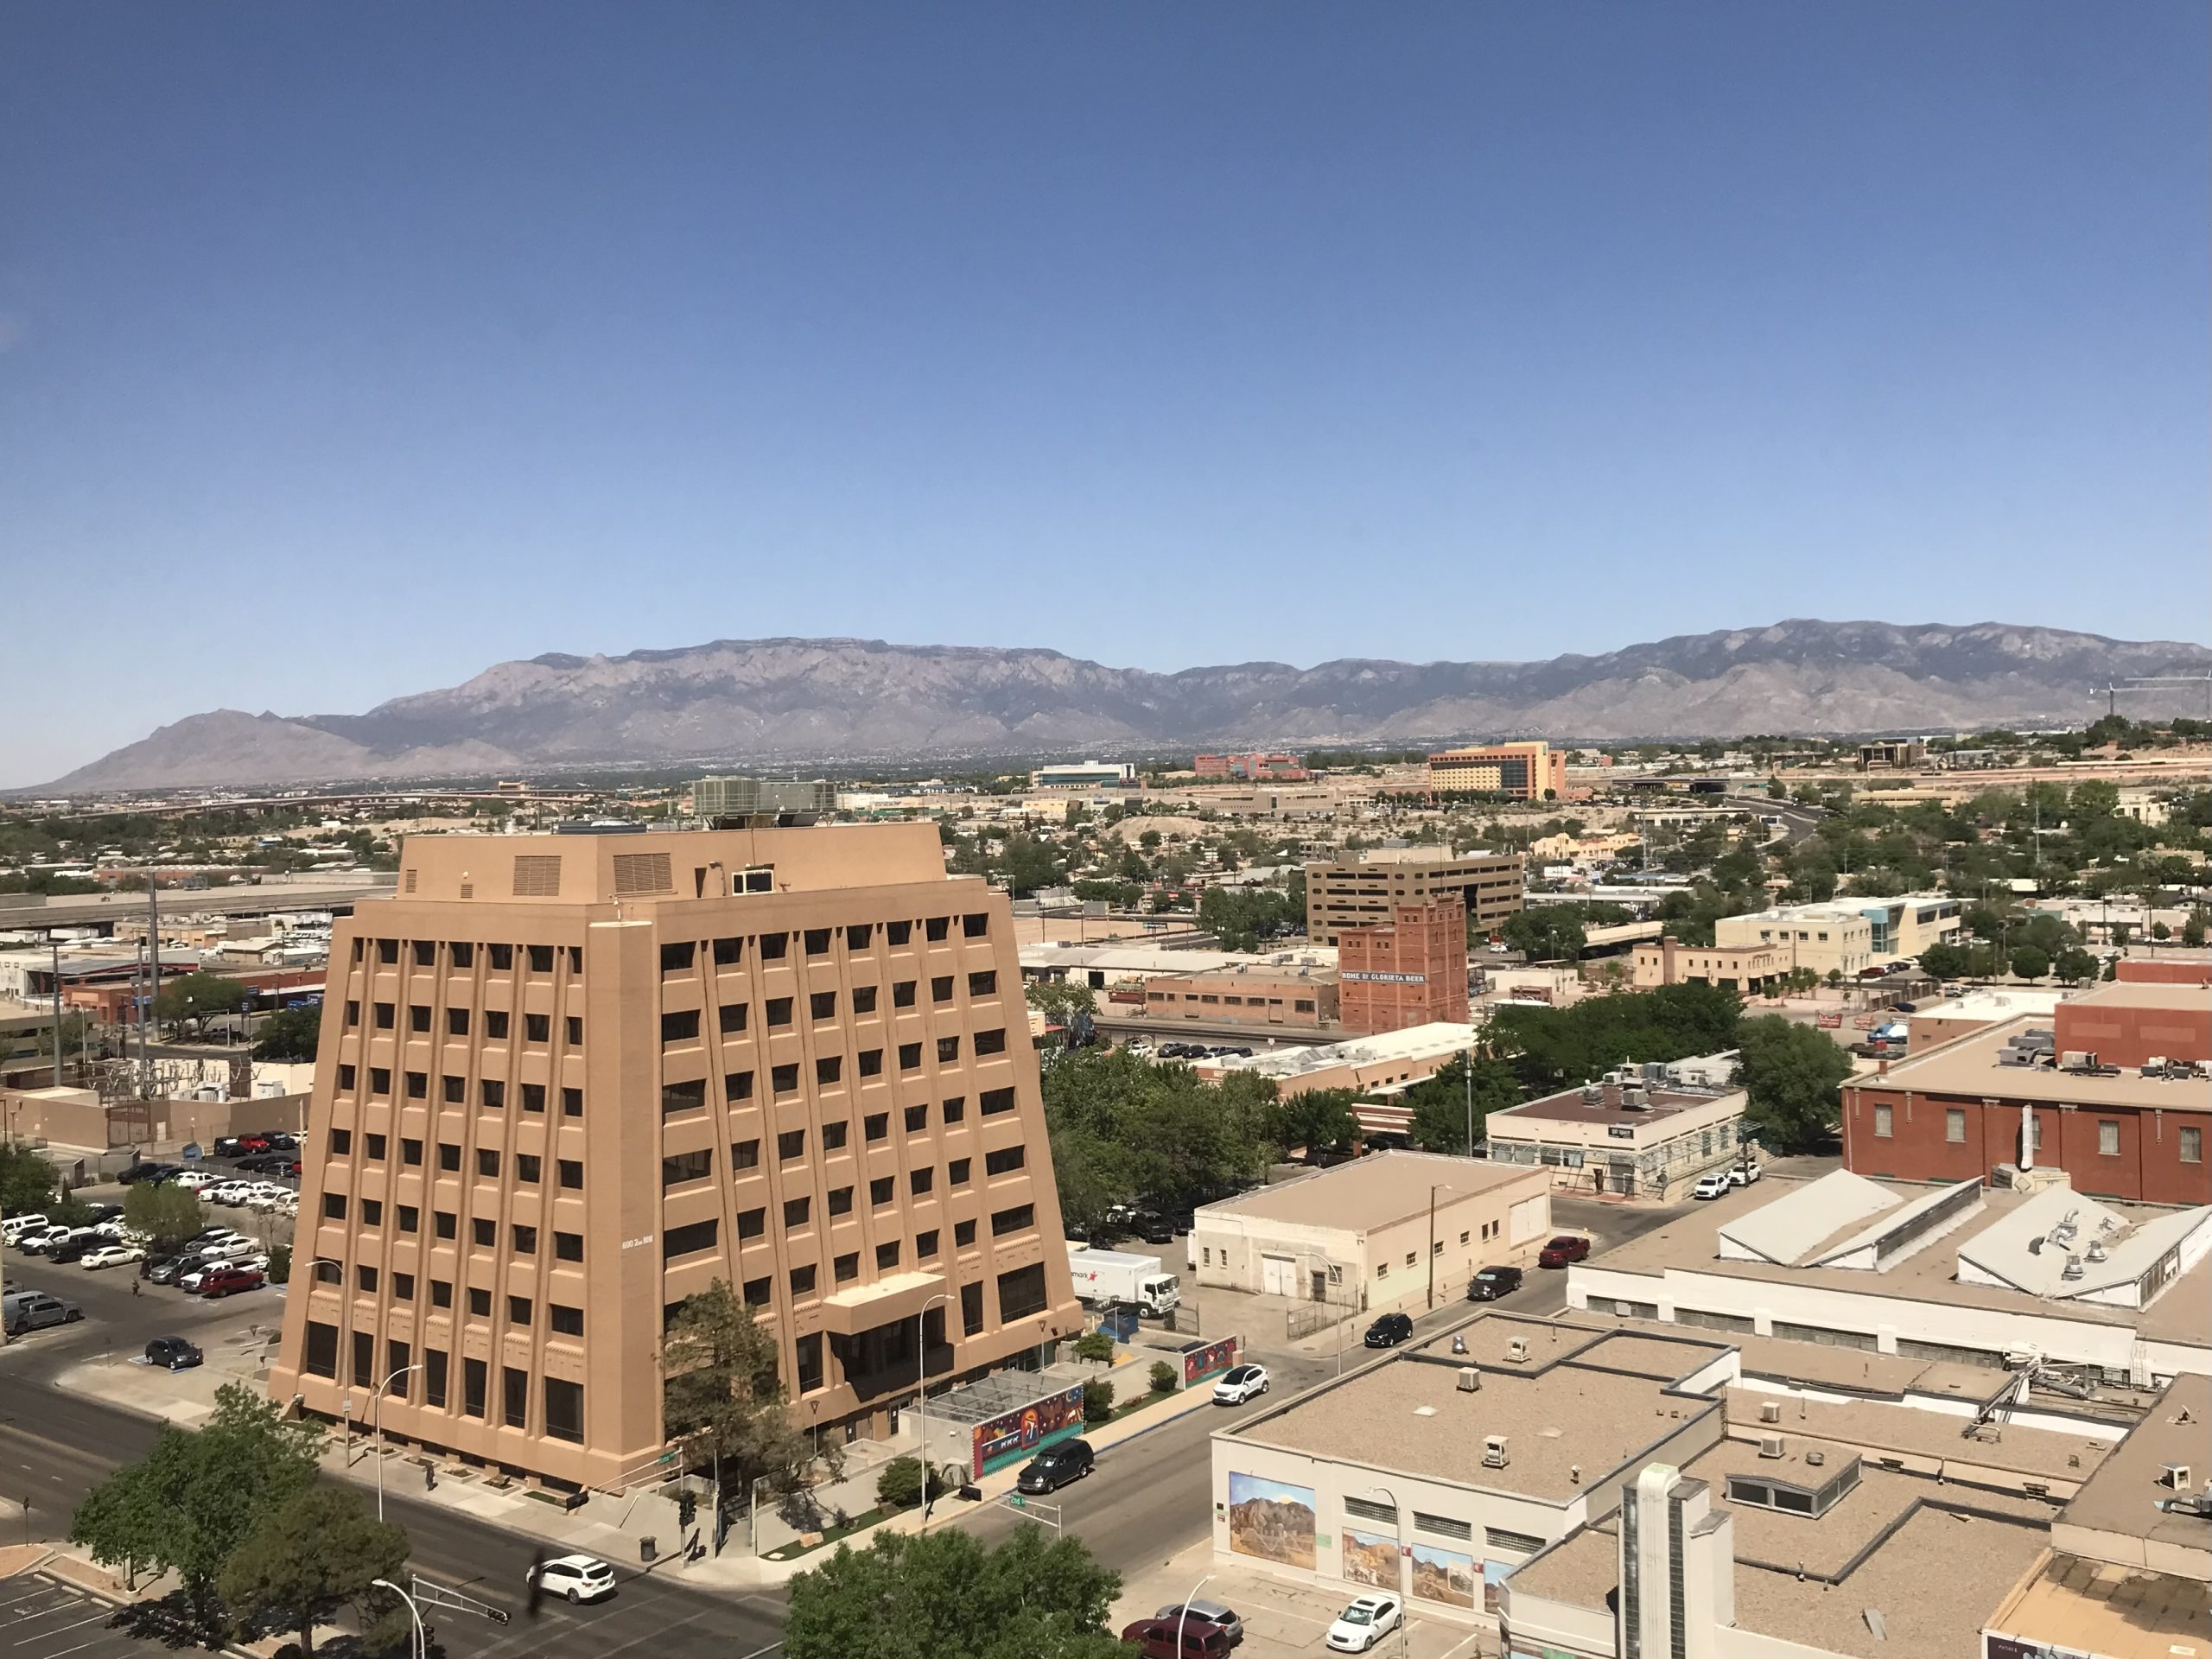 Meet Us in Albuquerque for the 2024 AFS Annual Meeting The American